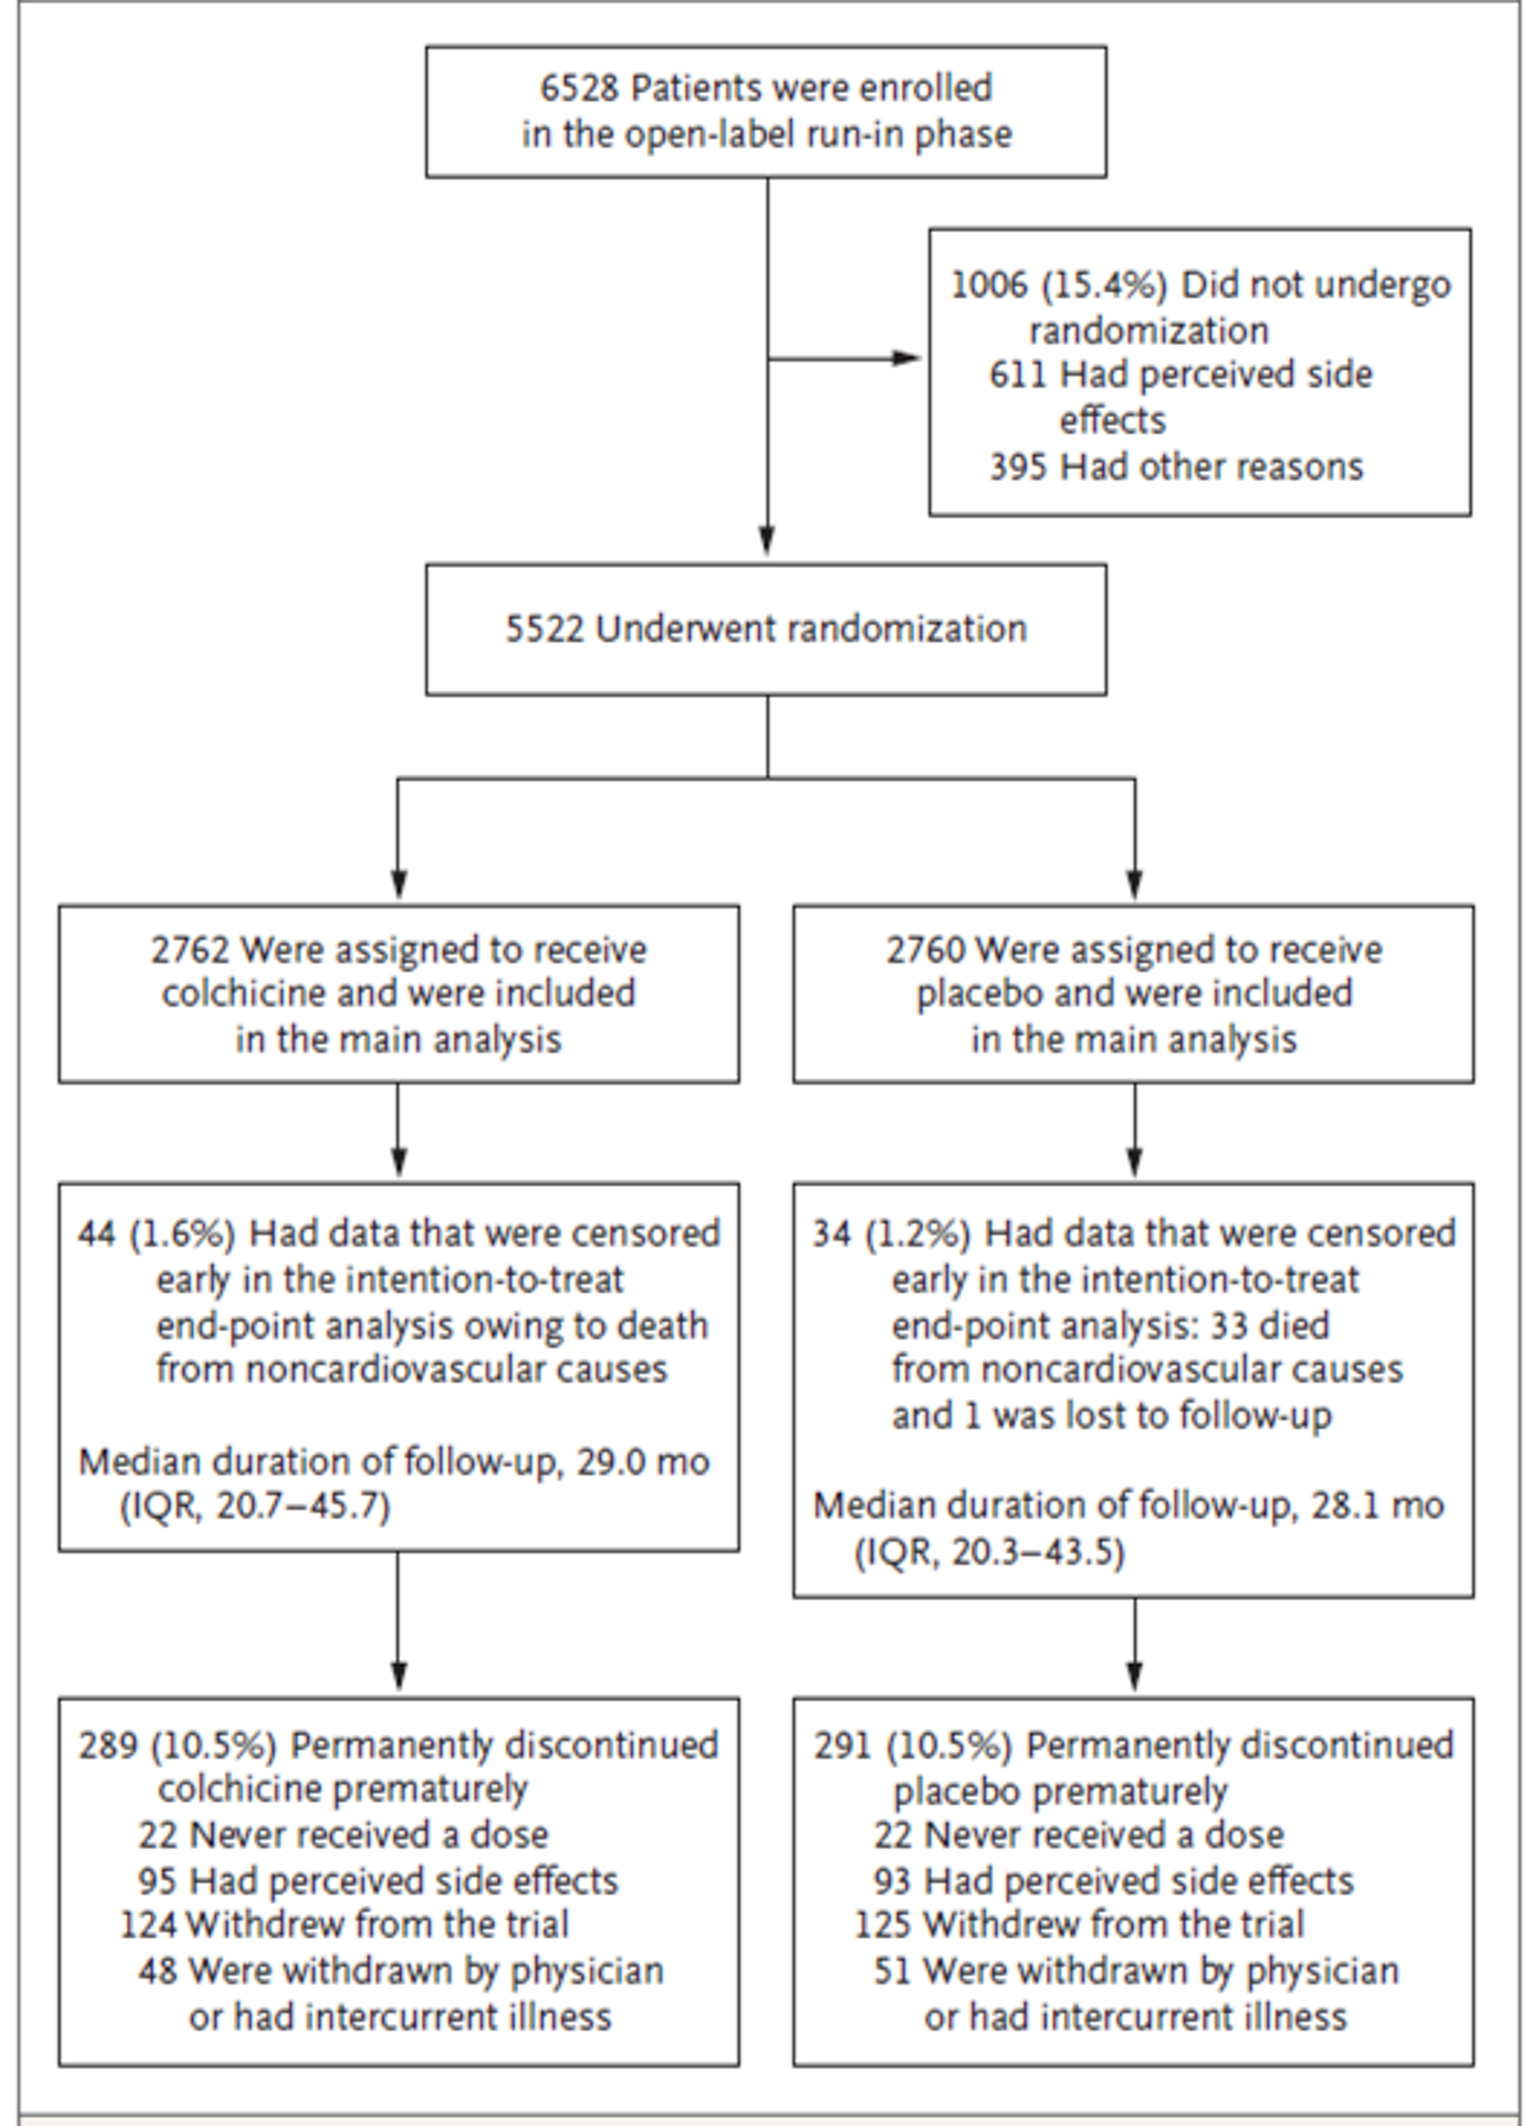 Among the 6,528 patients enrolled in the LoDoCo2 study, 5,522 underwent randomization and were assigned to colchicine (2,762 patients) or placebo (2,760 patients). In the colchicine group, 289 patients permanently discontinued the study drug, and 291 patients stopped placebo prematurely.